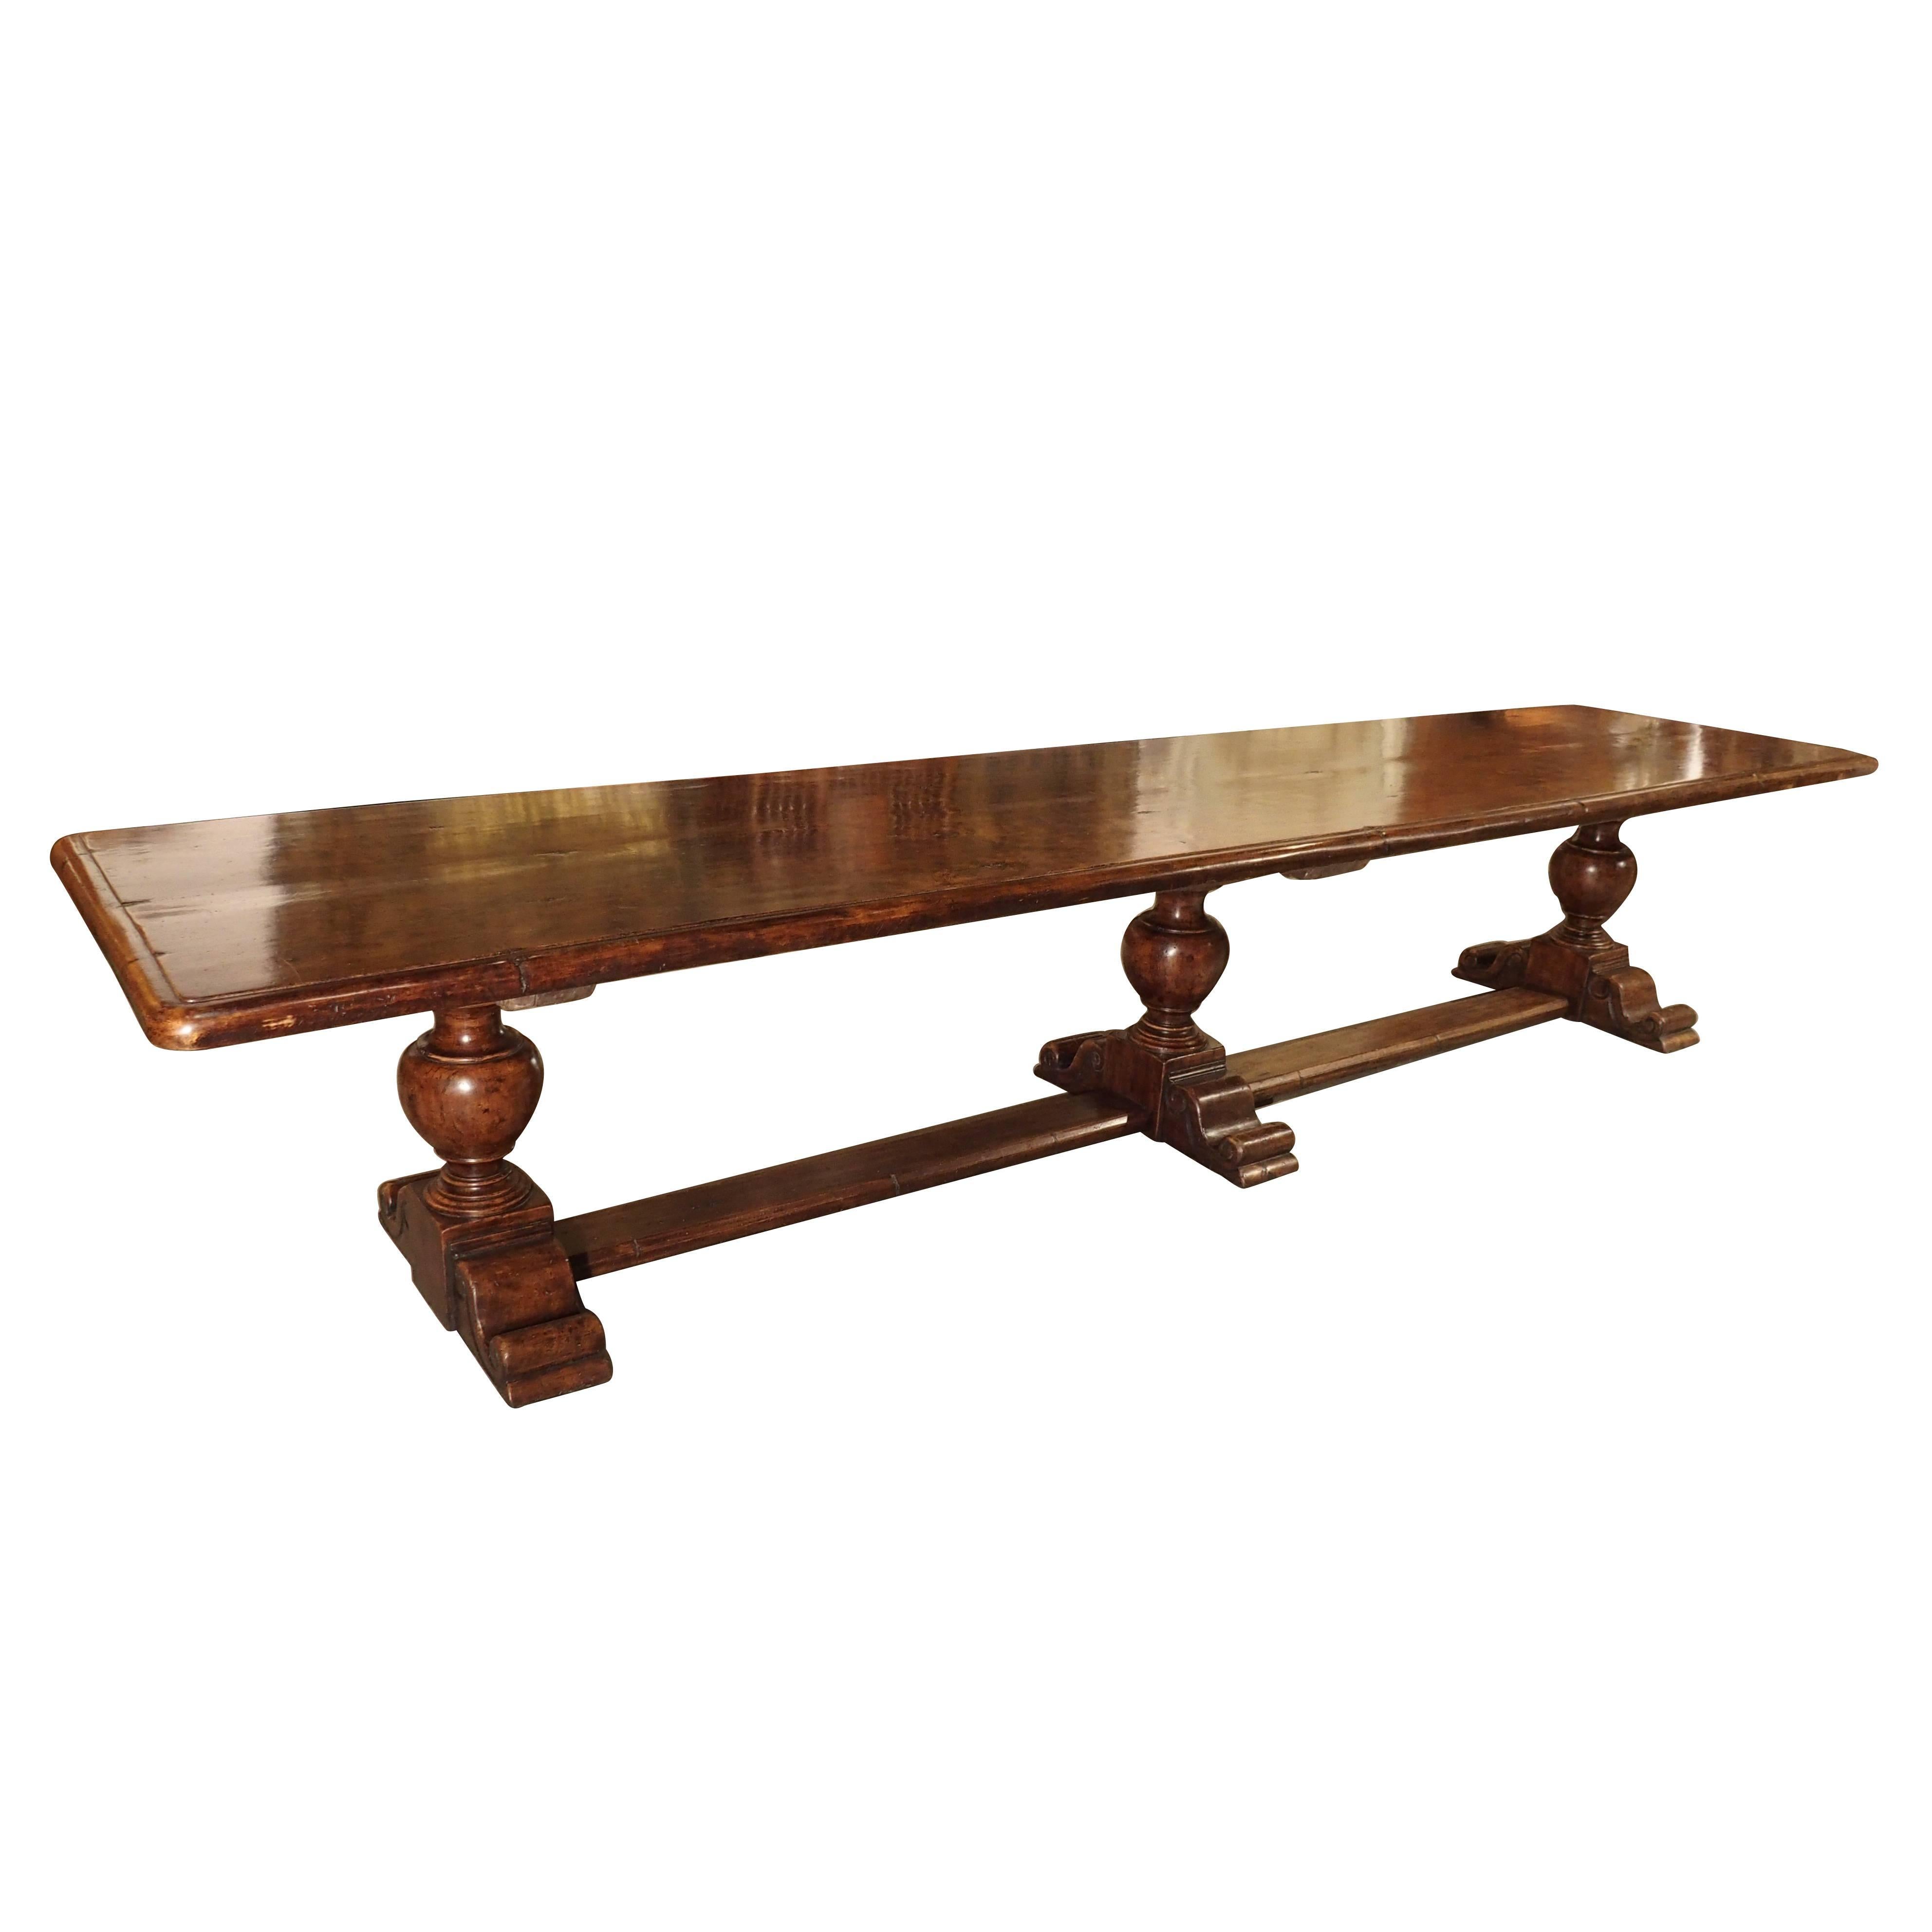 14' Long Walnut Wood Dining Table from Italy